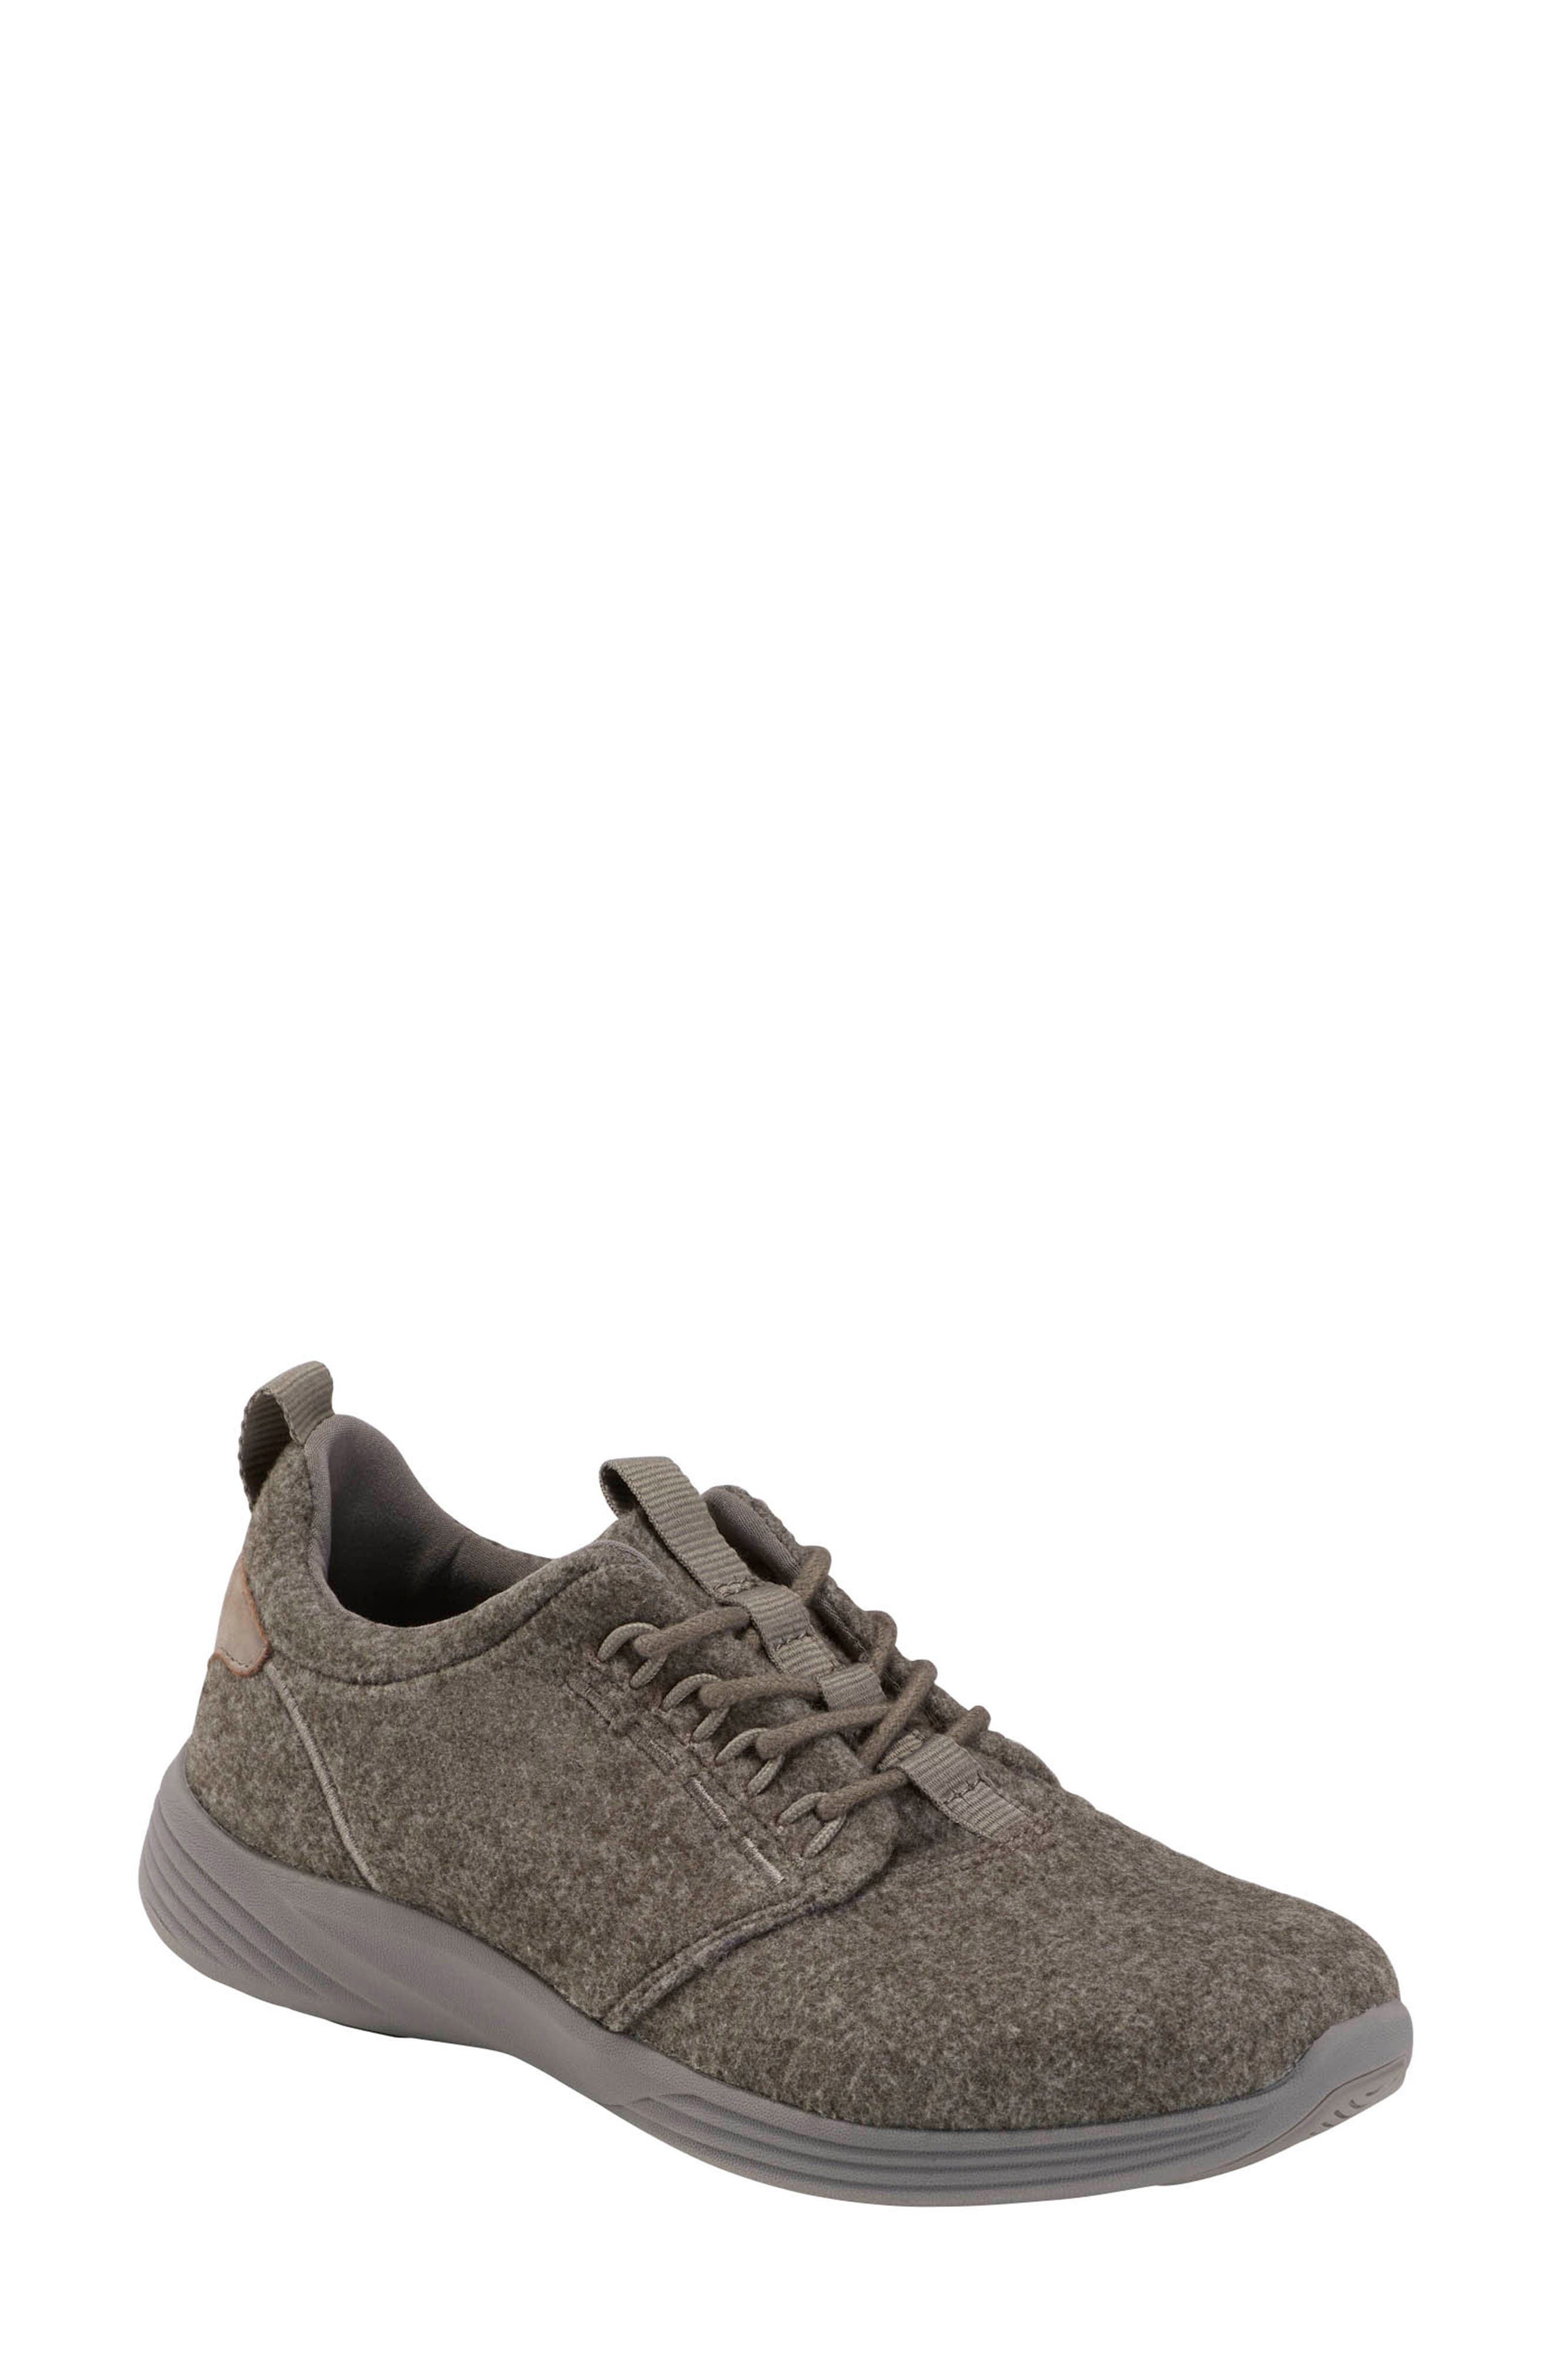 Women's Earth® Shoes | Nordstrom